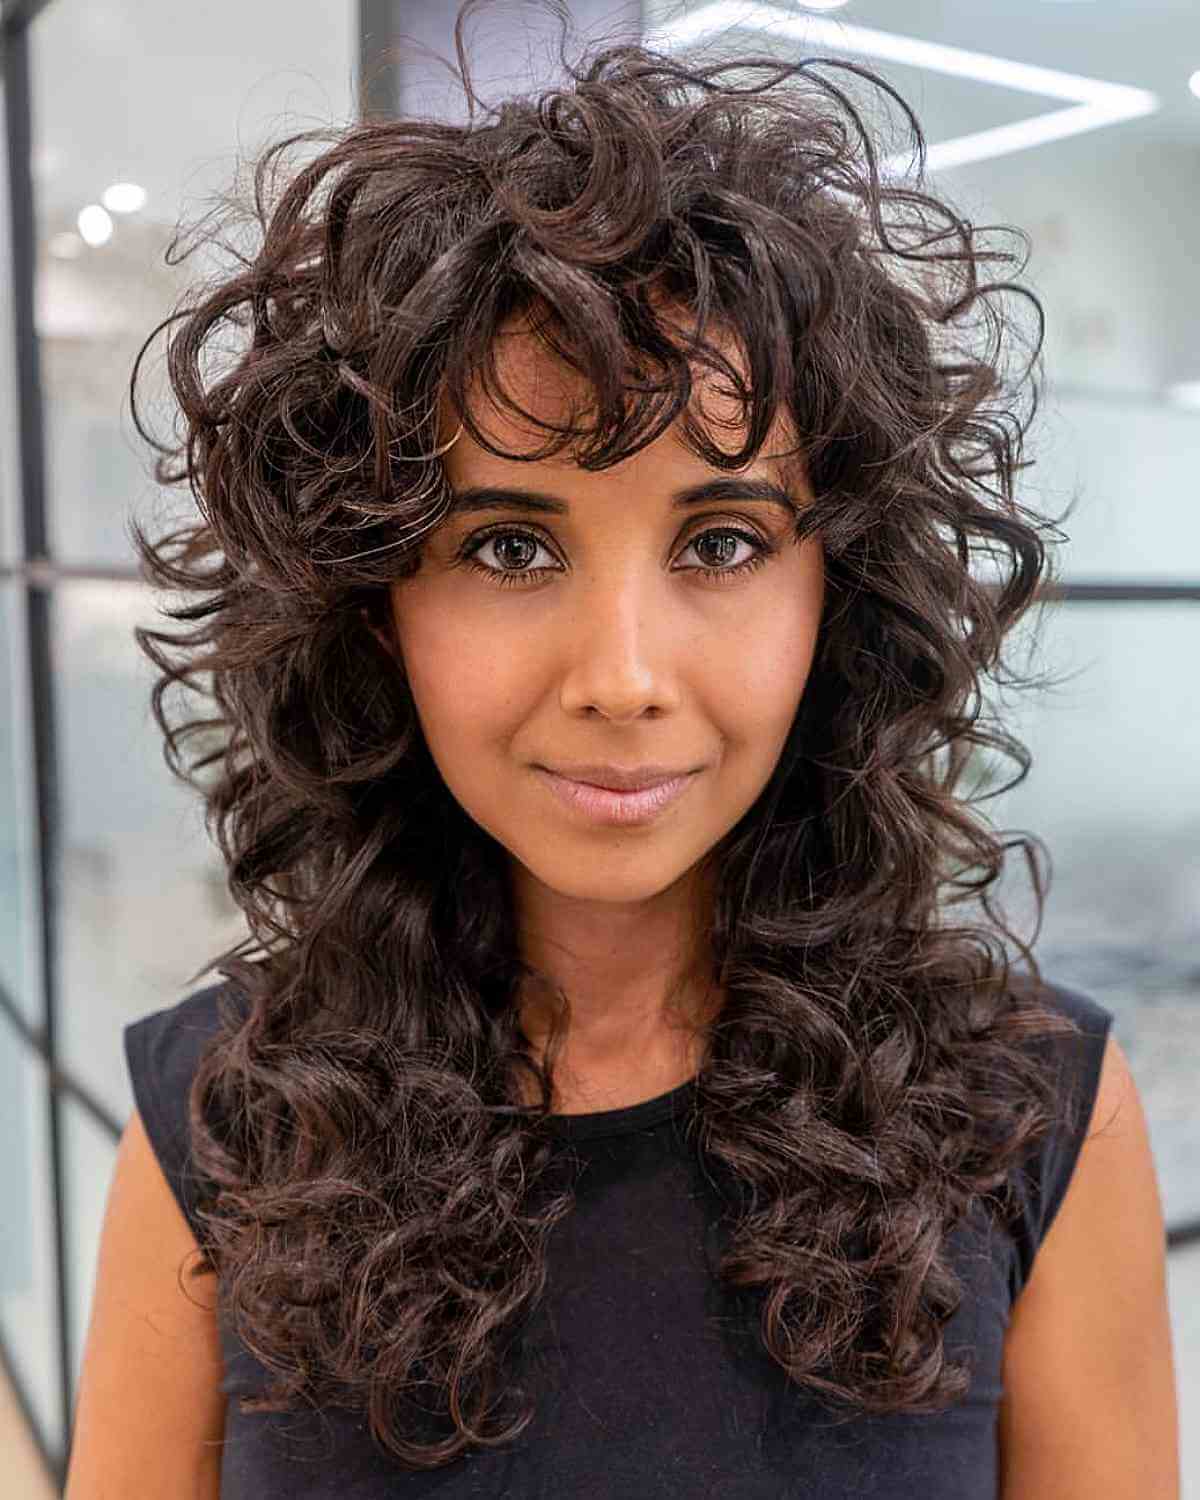 long curly shag with curly bangs on women over 40